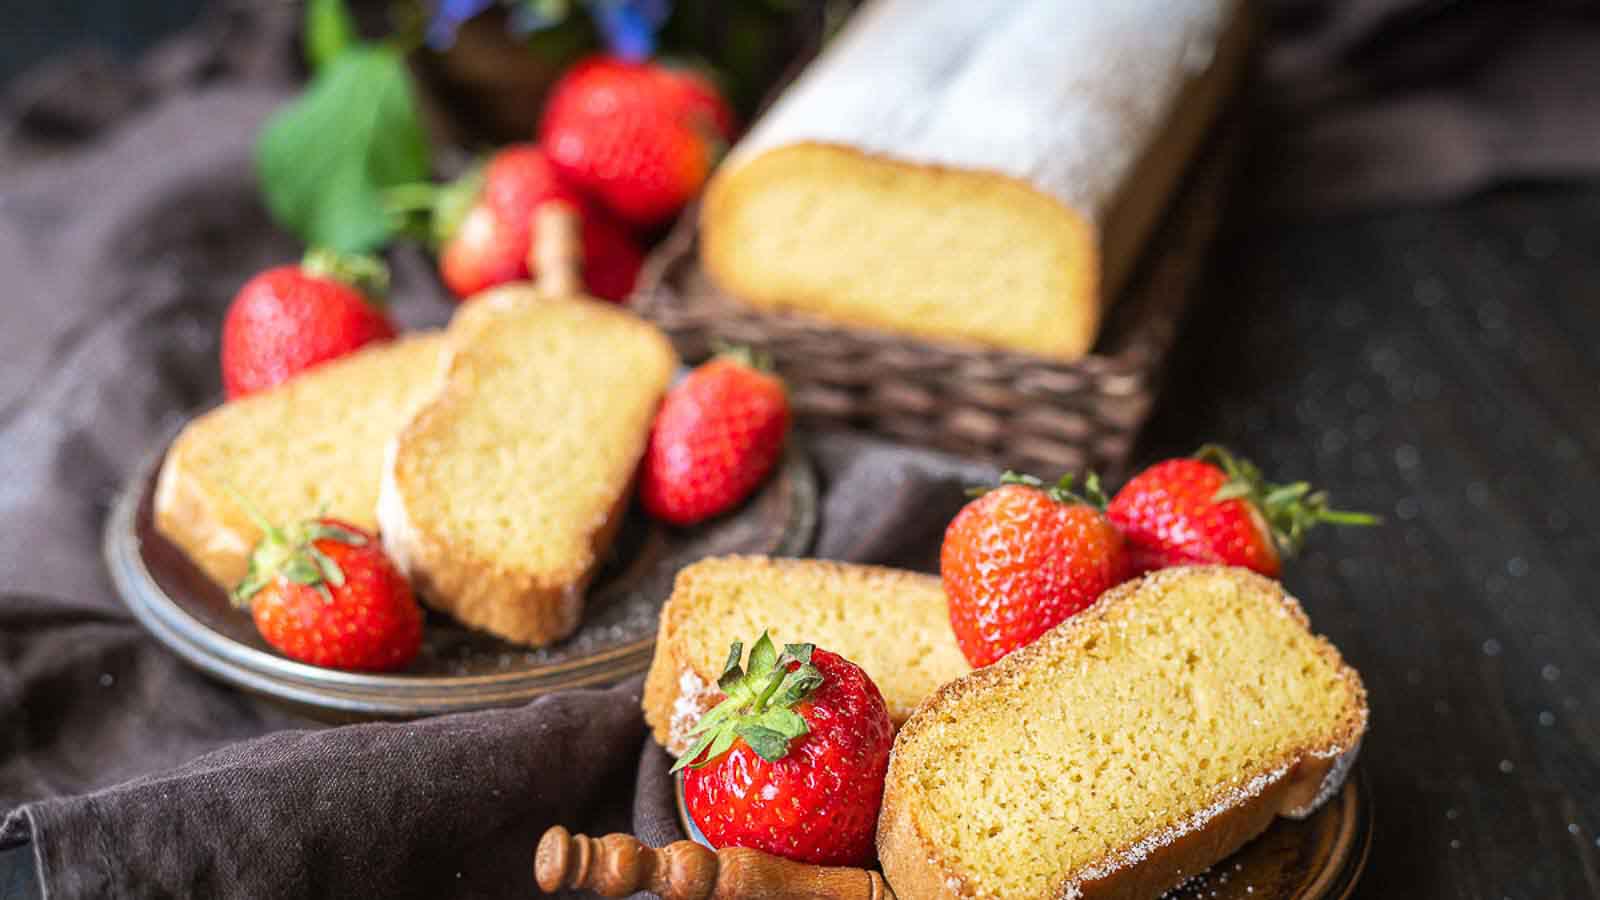 Pound Cake with strawberries.